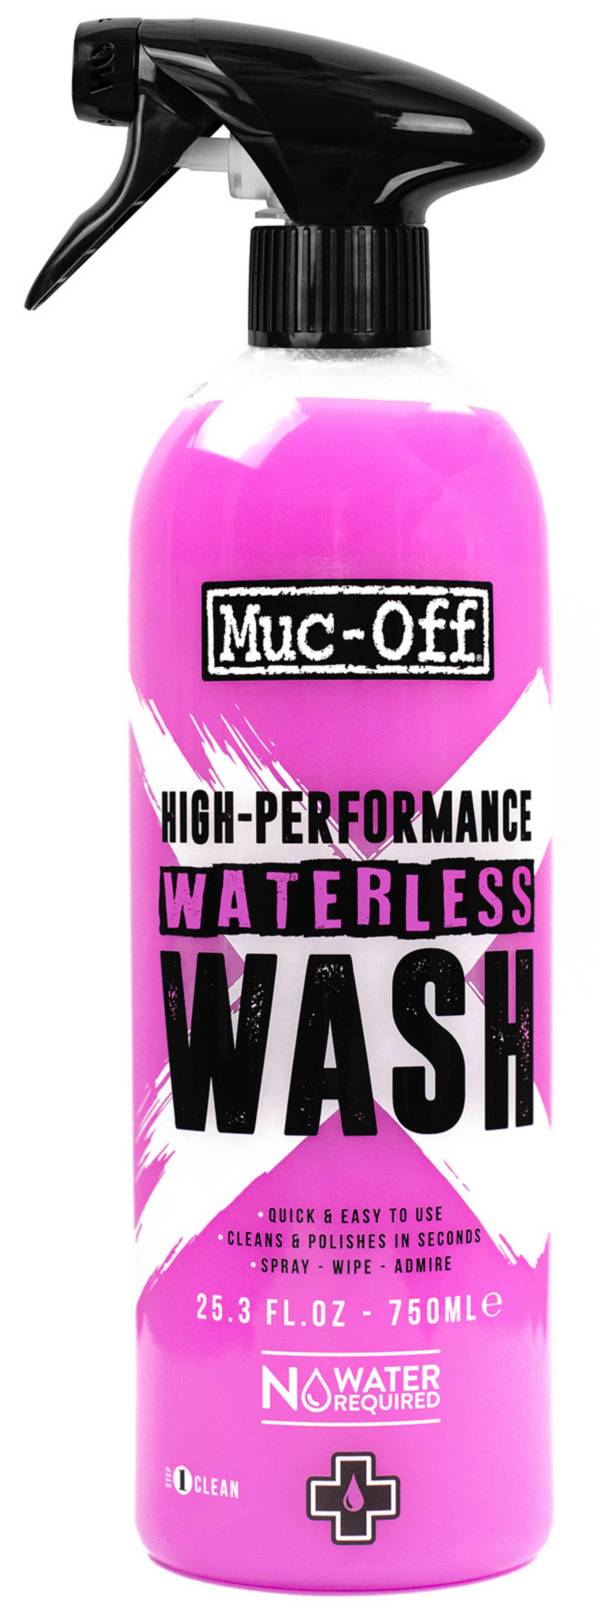 Muc-Off Waterless Wash product image